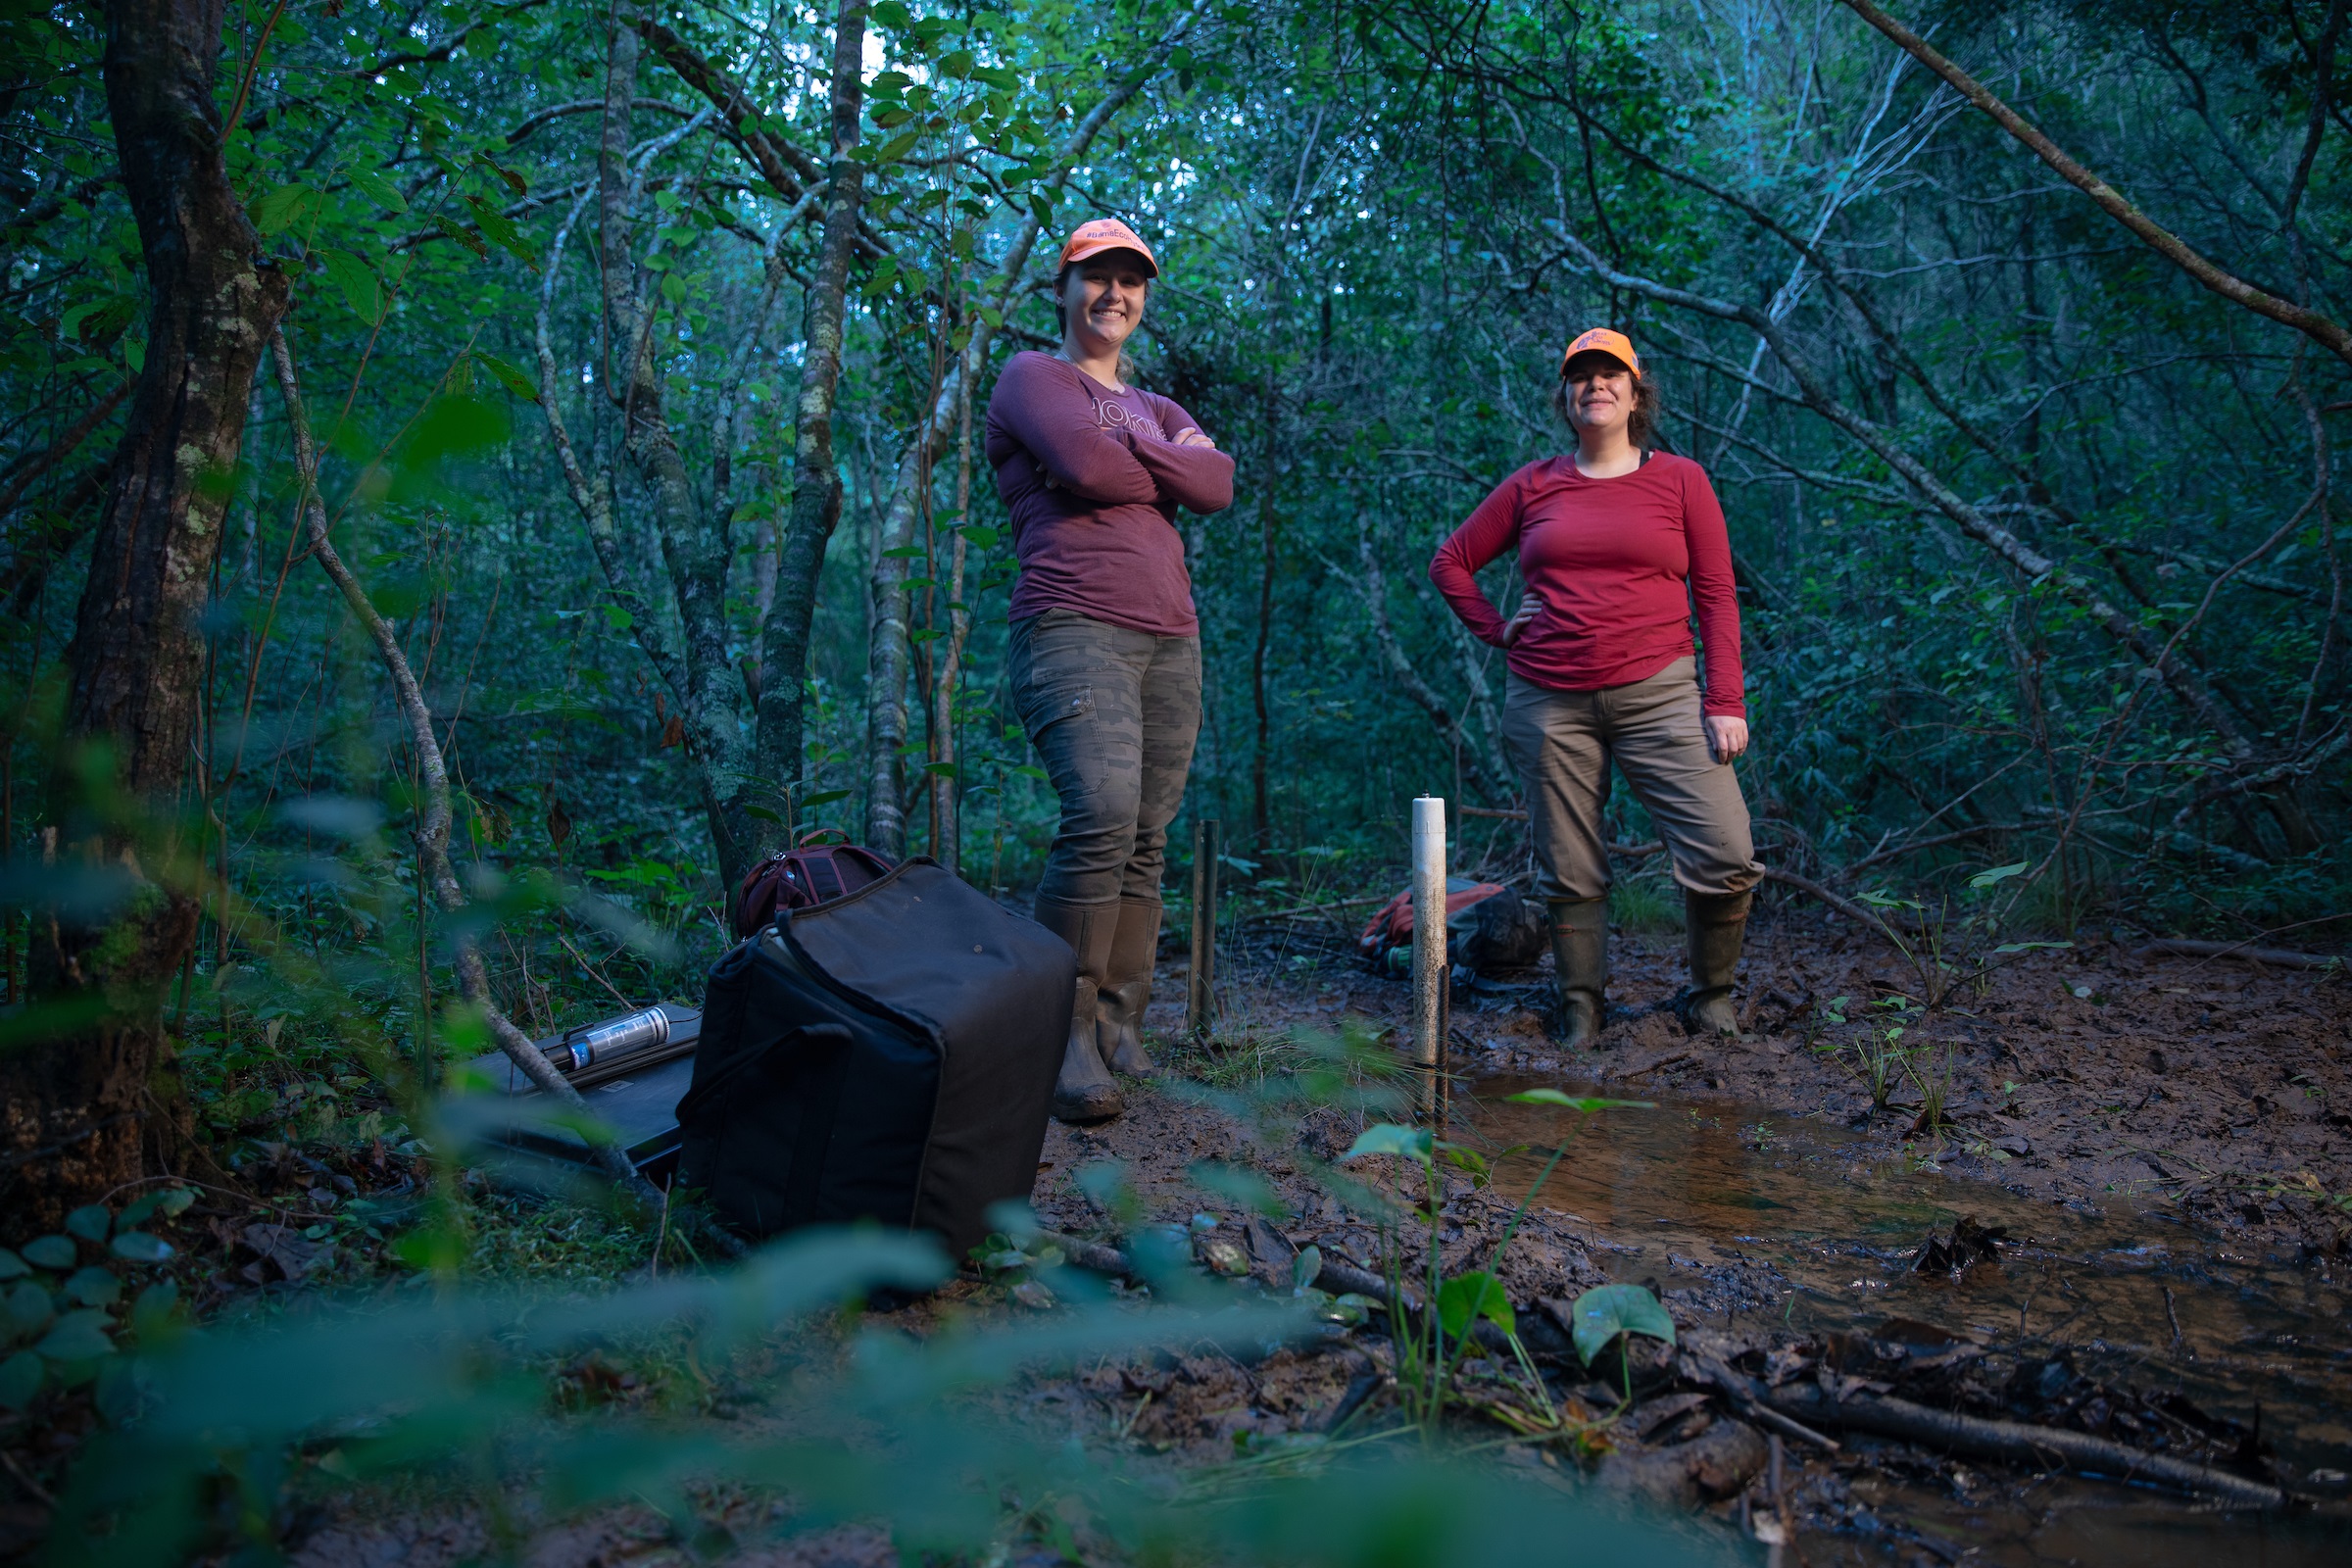 Two researchers in mud boots pose for a photo by a forest stream.